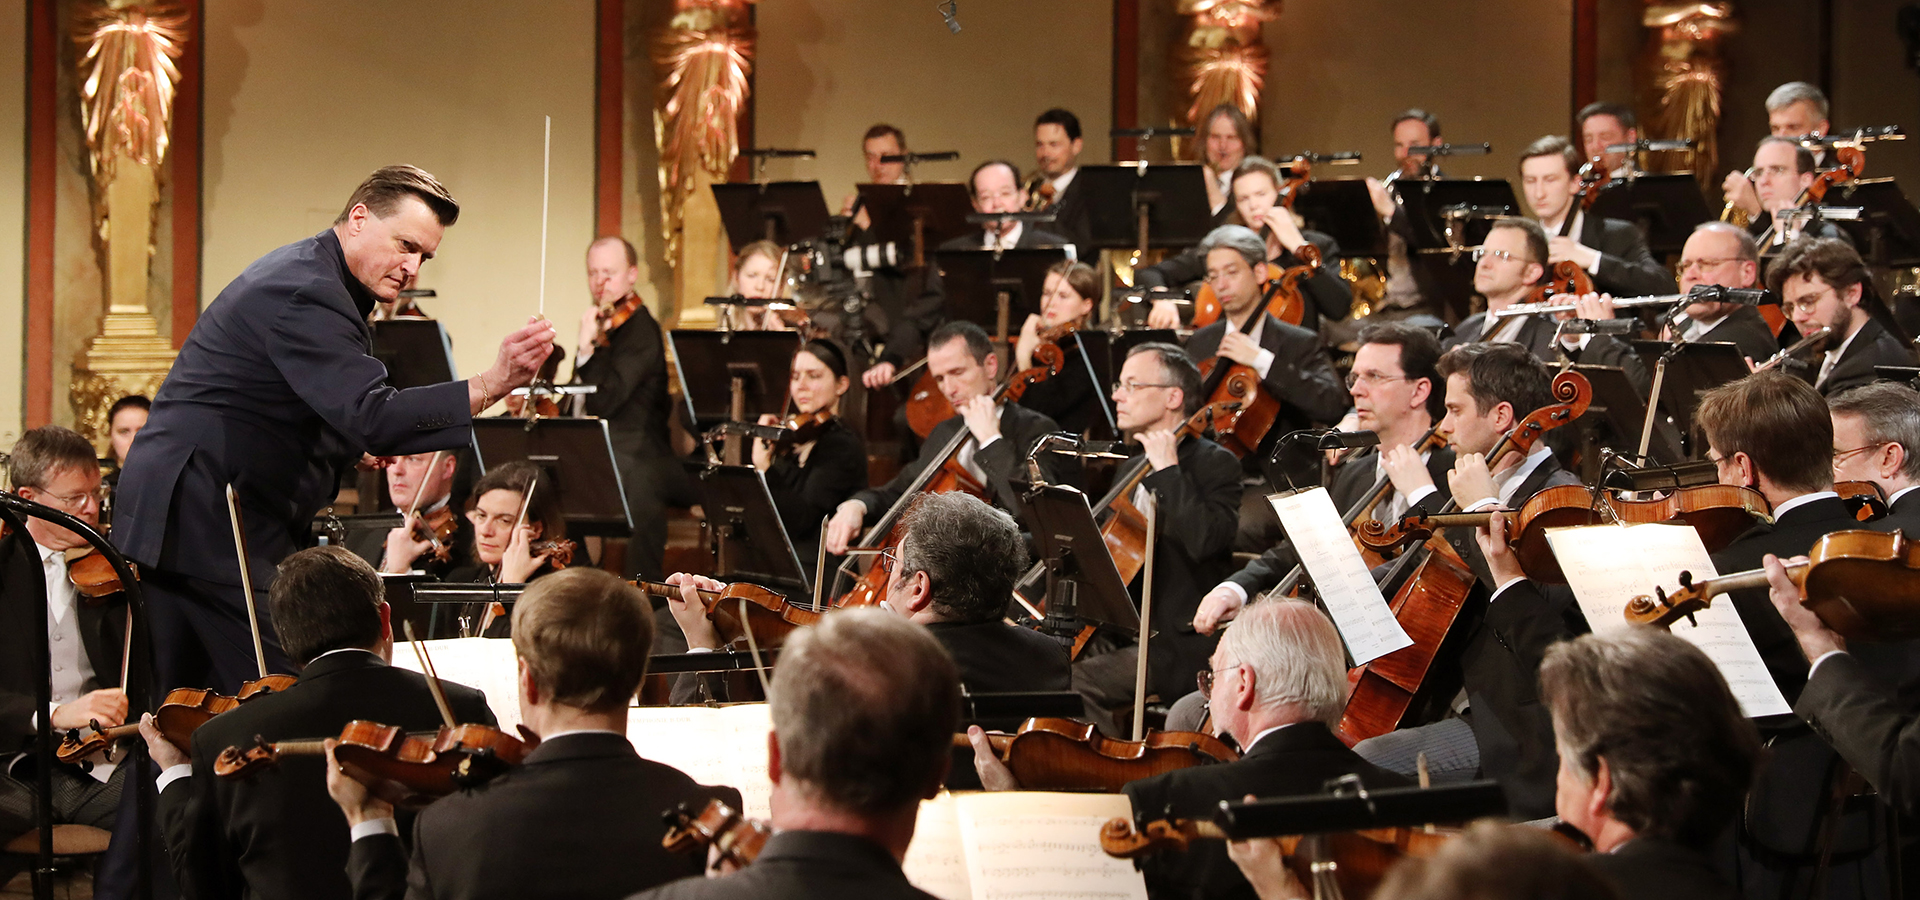 Vienna Philharmonic Orchestra performing on stage